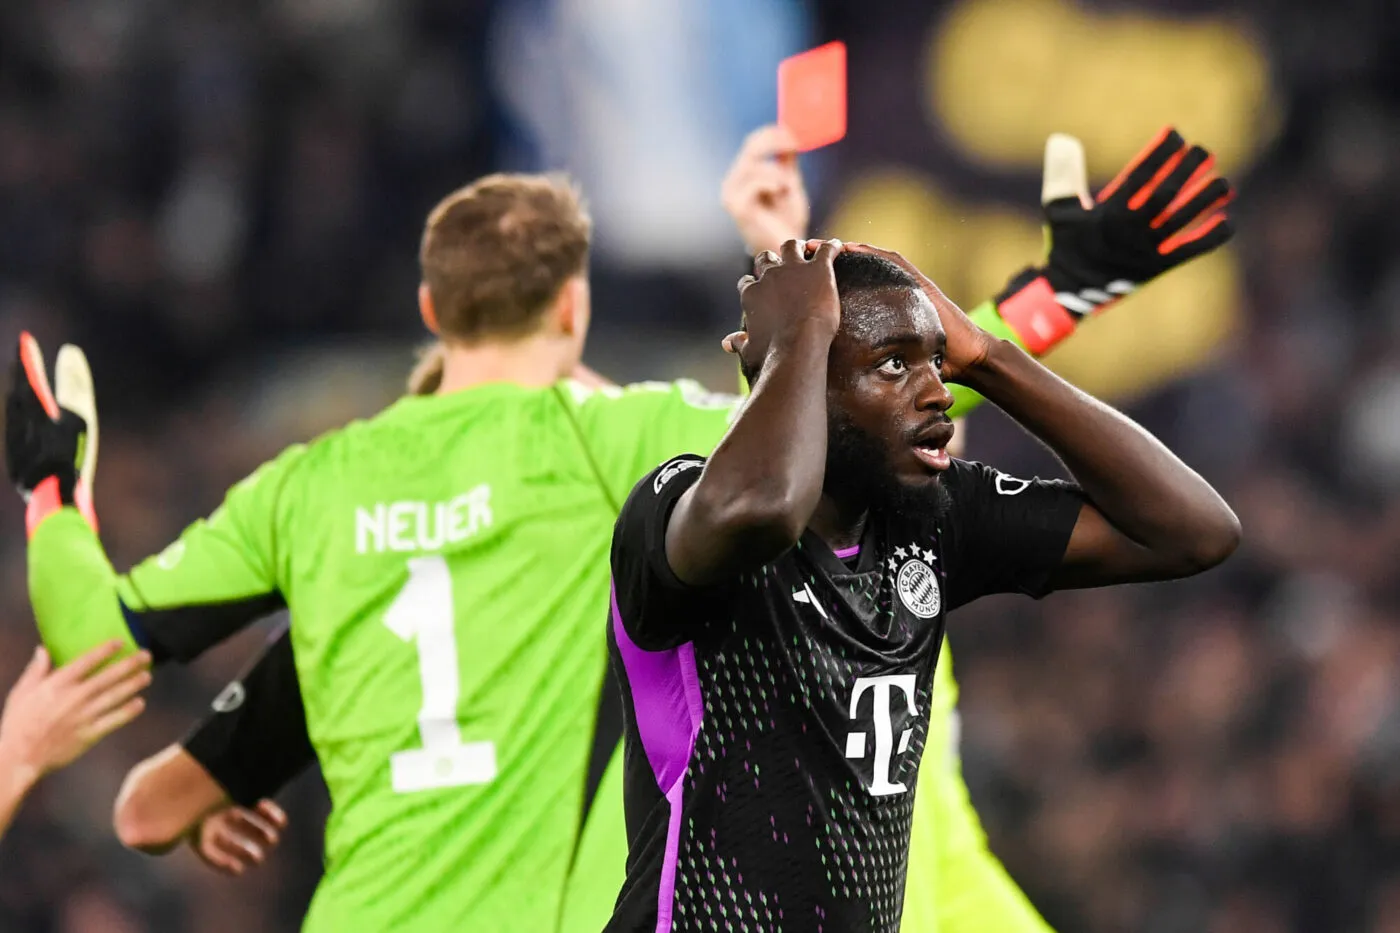 Ejection of Dayot Upamecano of Bayern Munchen by the referee Francois Letexier during the Champions League football match between SS Lazio and FC Bayern Munchen at Olimpico stadium in Rome (Italy), February 14th, 2024./Sipa USA No Sales in Italy - Photo by Icon Sport